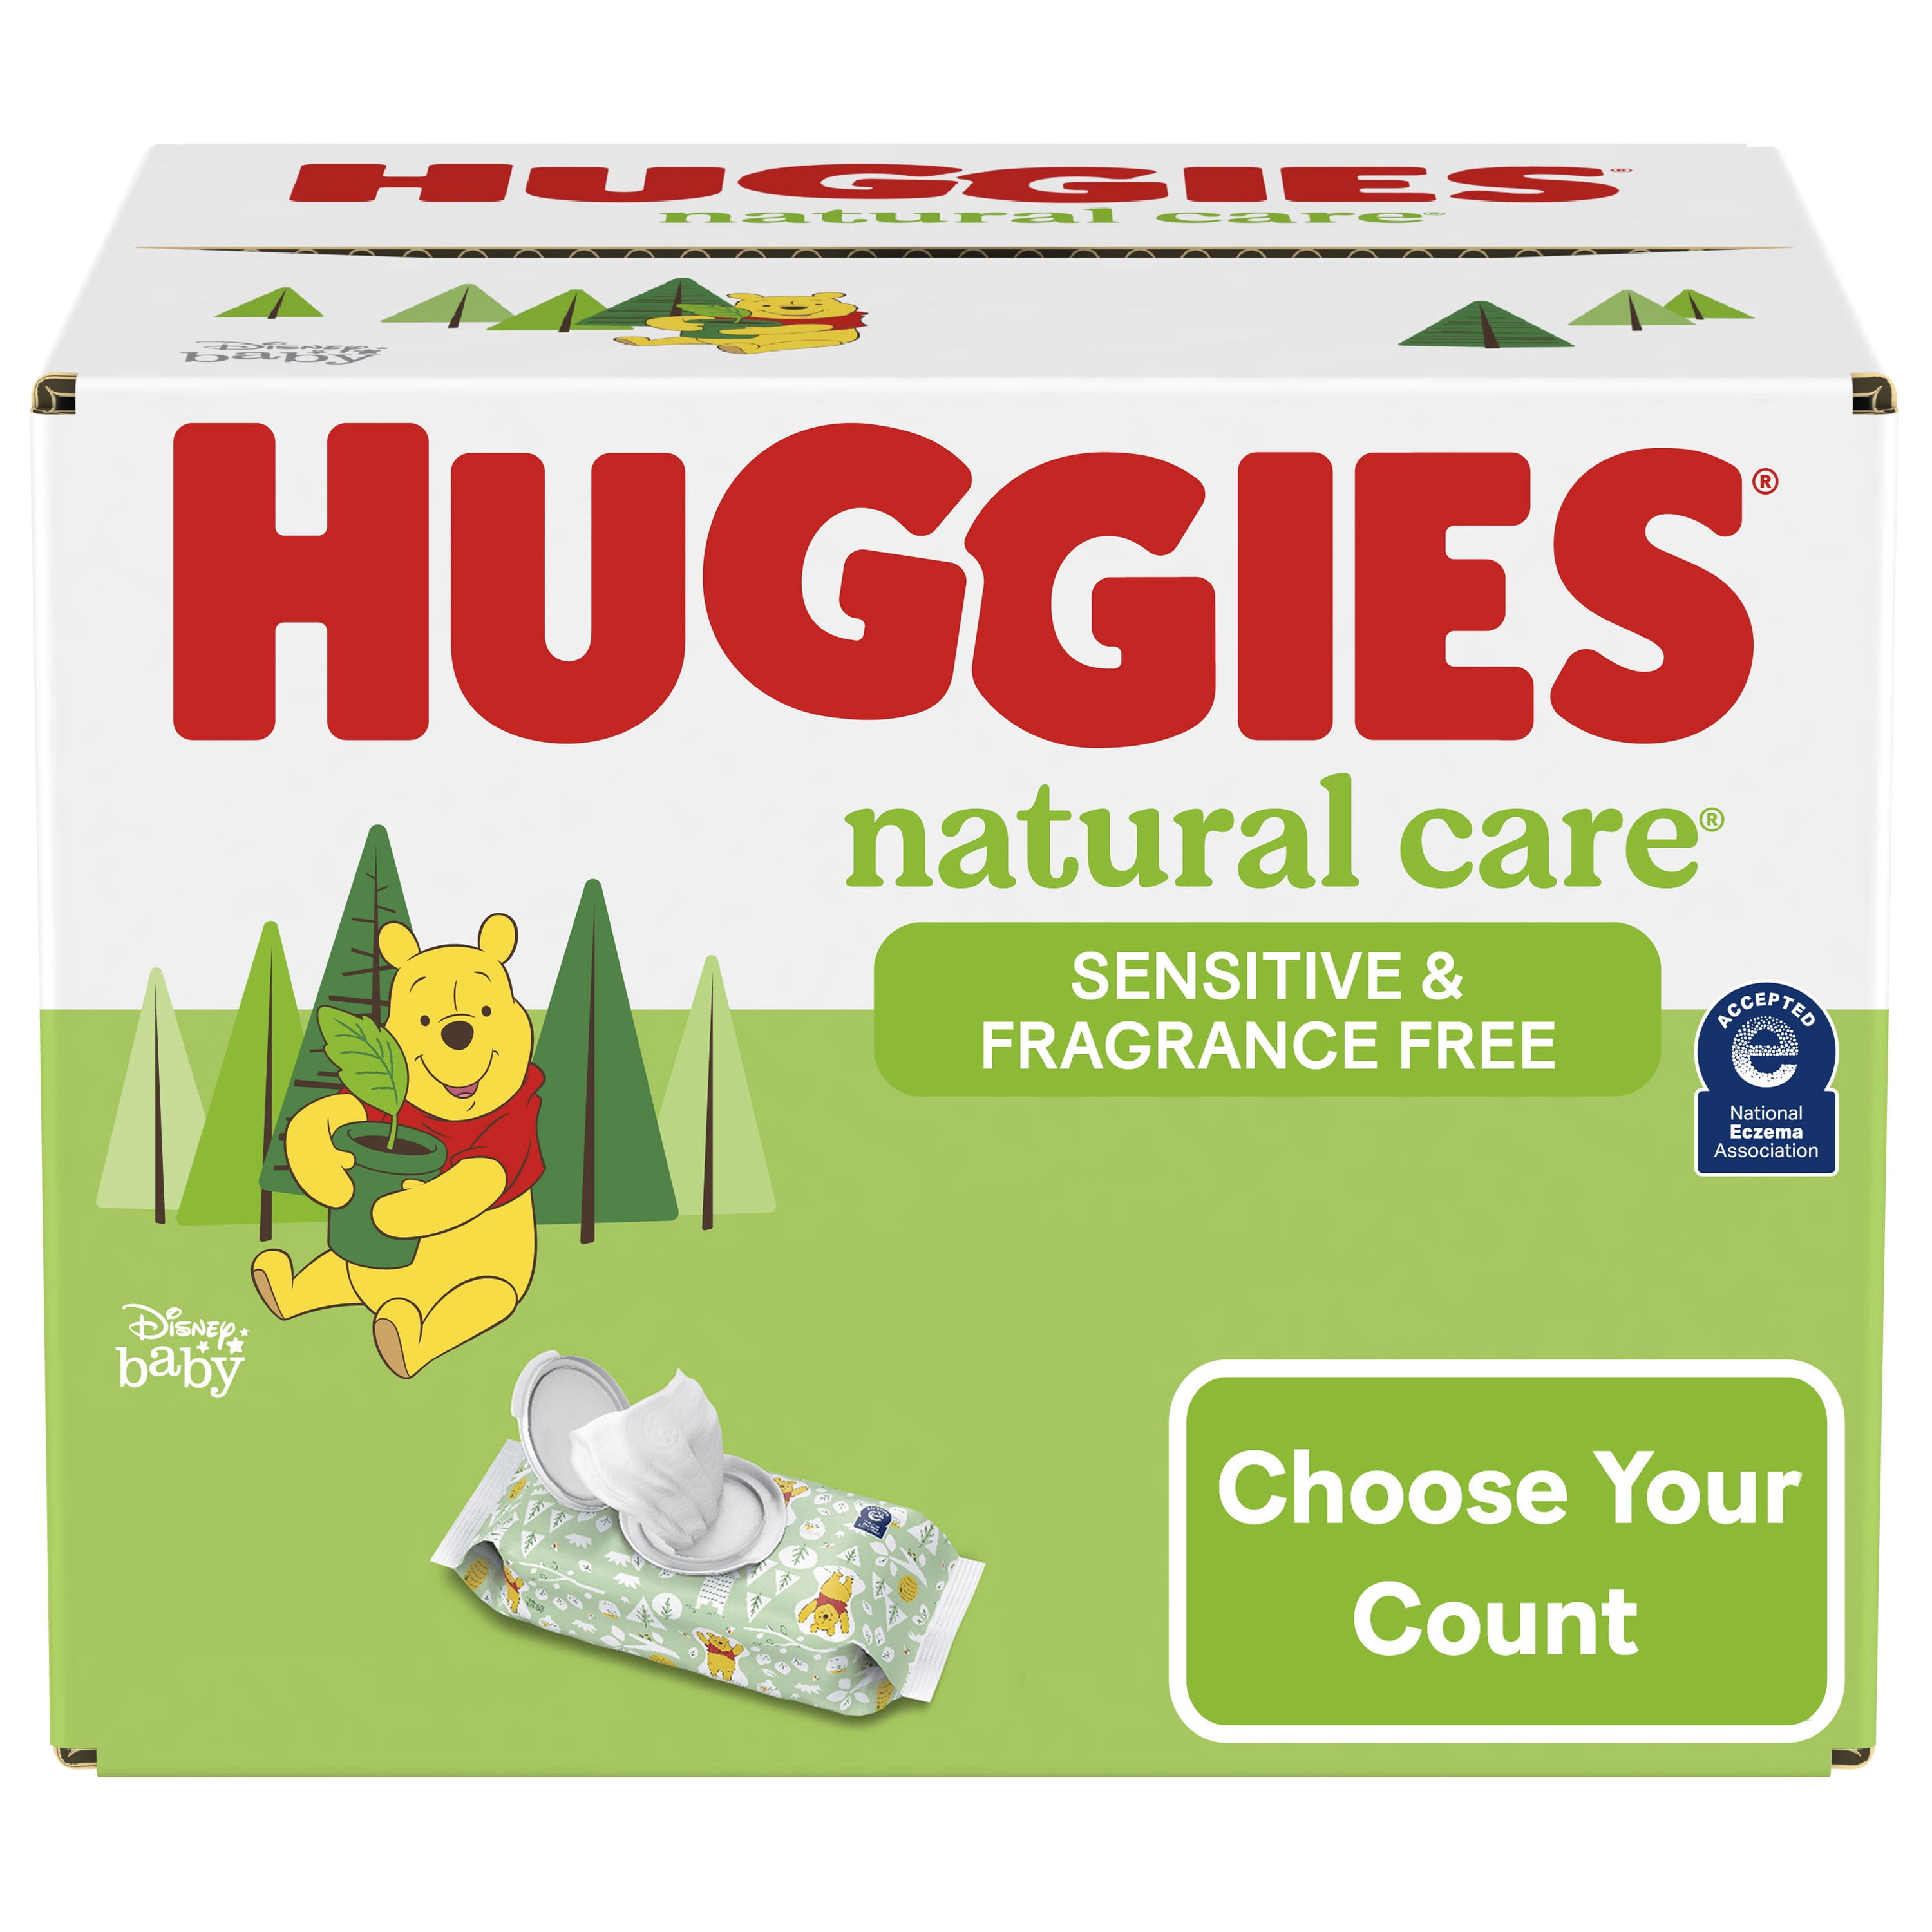 Huggies Natural Care Sensitive Baby Wipes, Unscented, 6 Flip-Top Packs (288 Wipes Total)